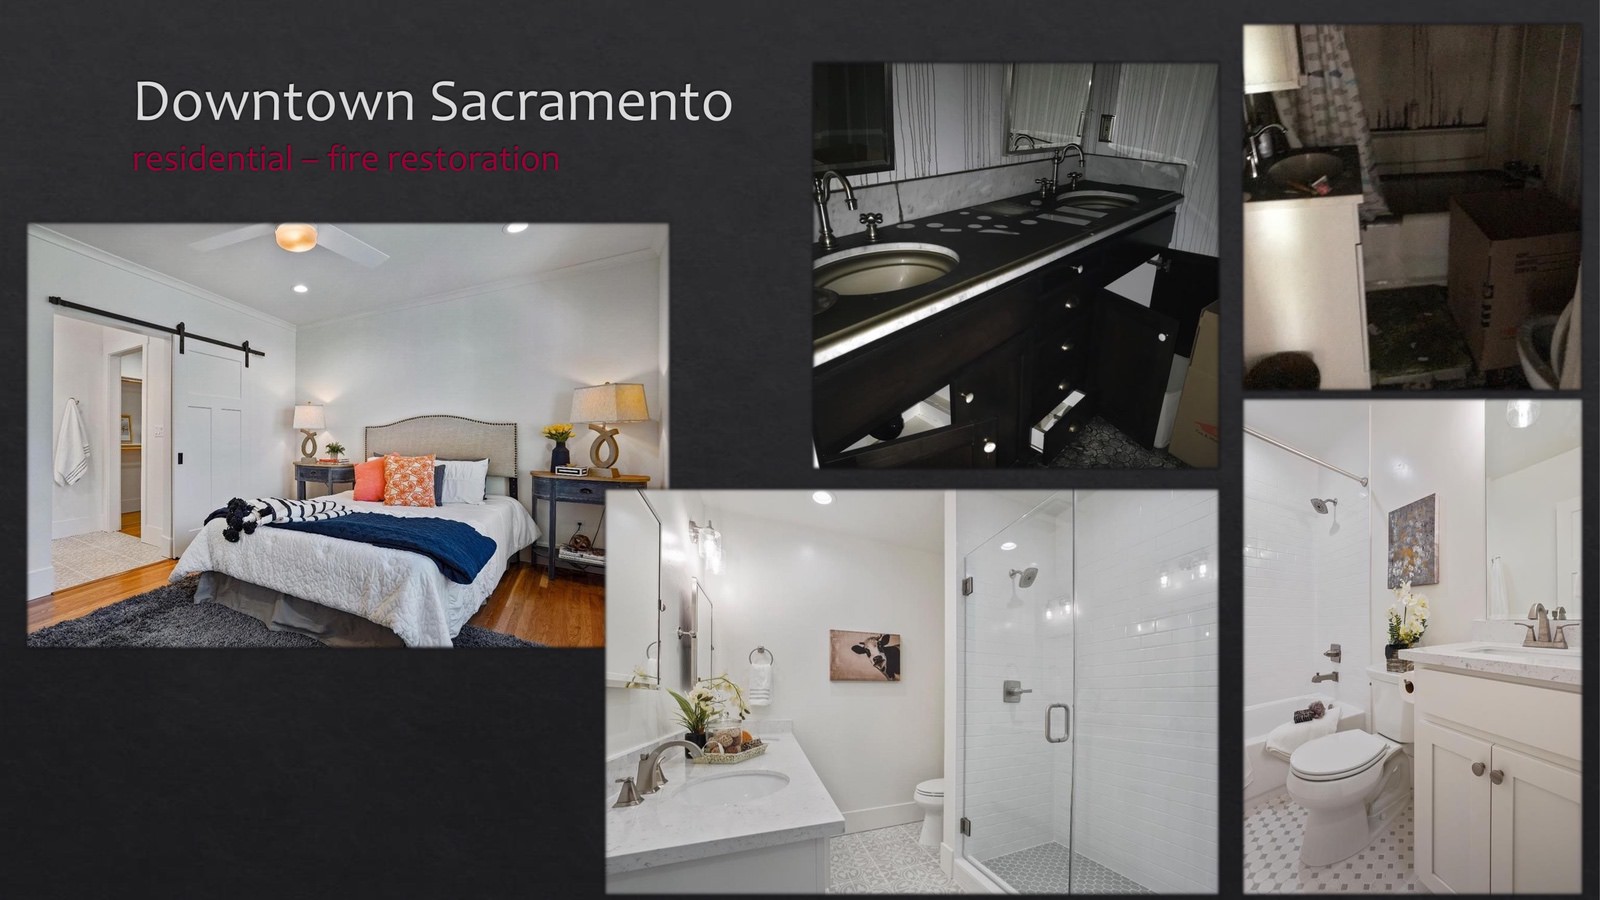 Downtown Sacramento Residential fire restoration - bathroom and bedroom